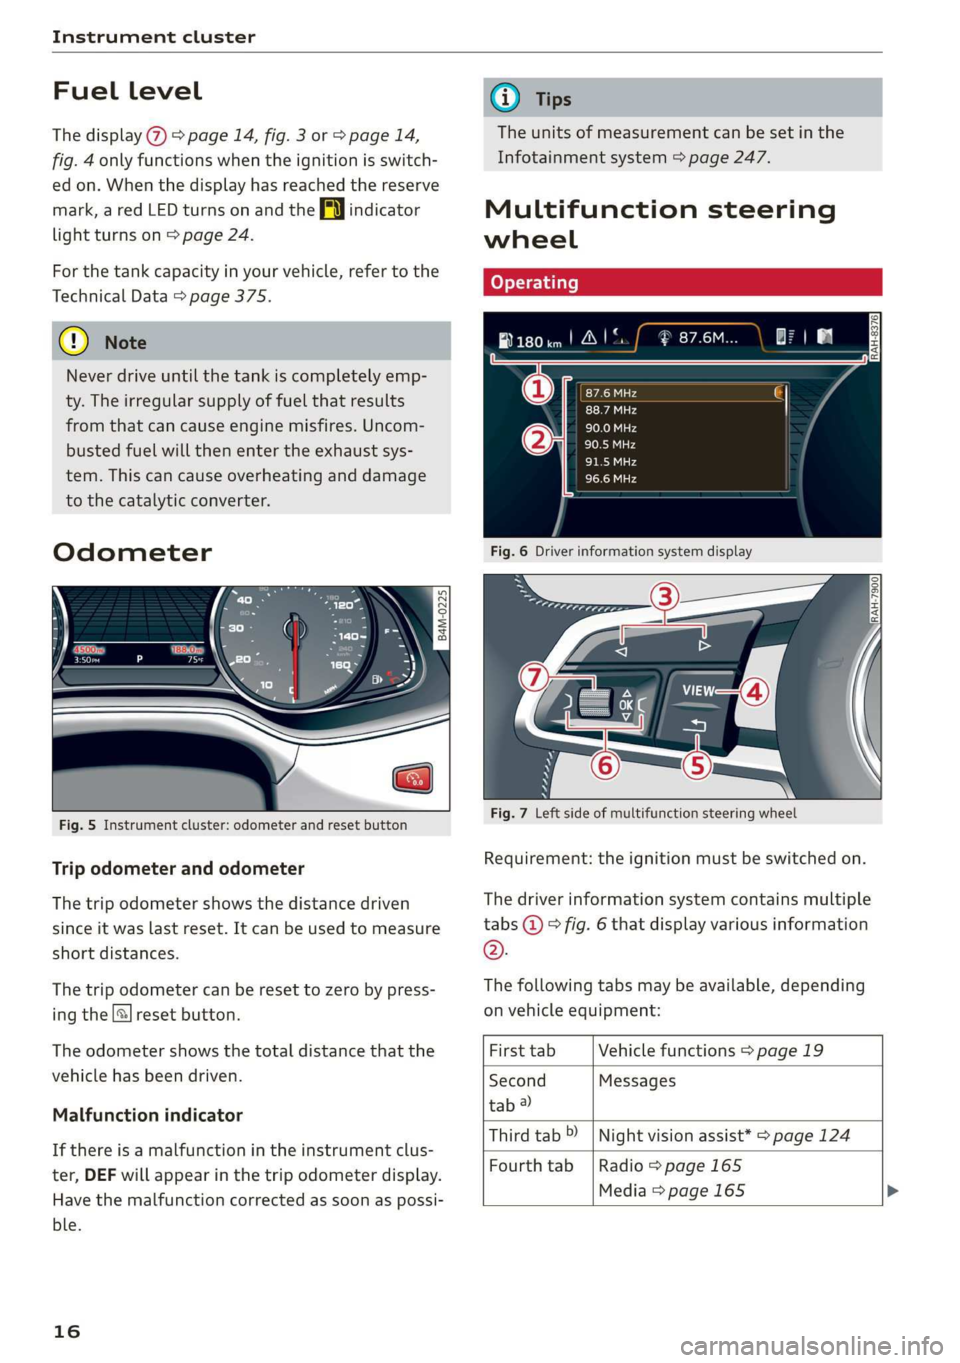 AUDI Q7 2019  Owner´s Manual Instrumentcluster
 
Fuellevel
Thedisplay@>page14,fig.3or>page14,
fig.4onlyfunctionswhentheignitionisswitch-
edon.Whenthedisplayhas reached thereserve
mark,aredLEDturnsonandtheAyindicator
lightturnson>